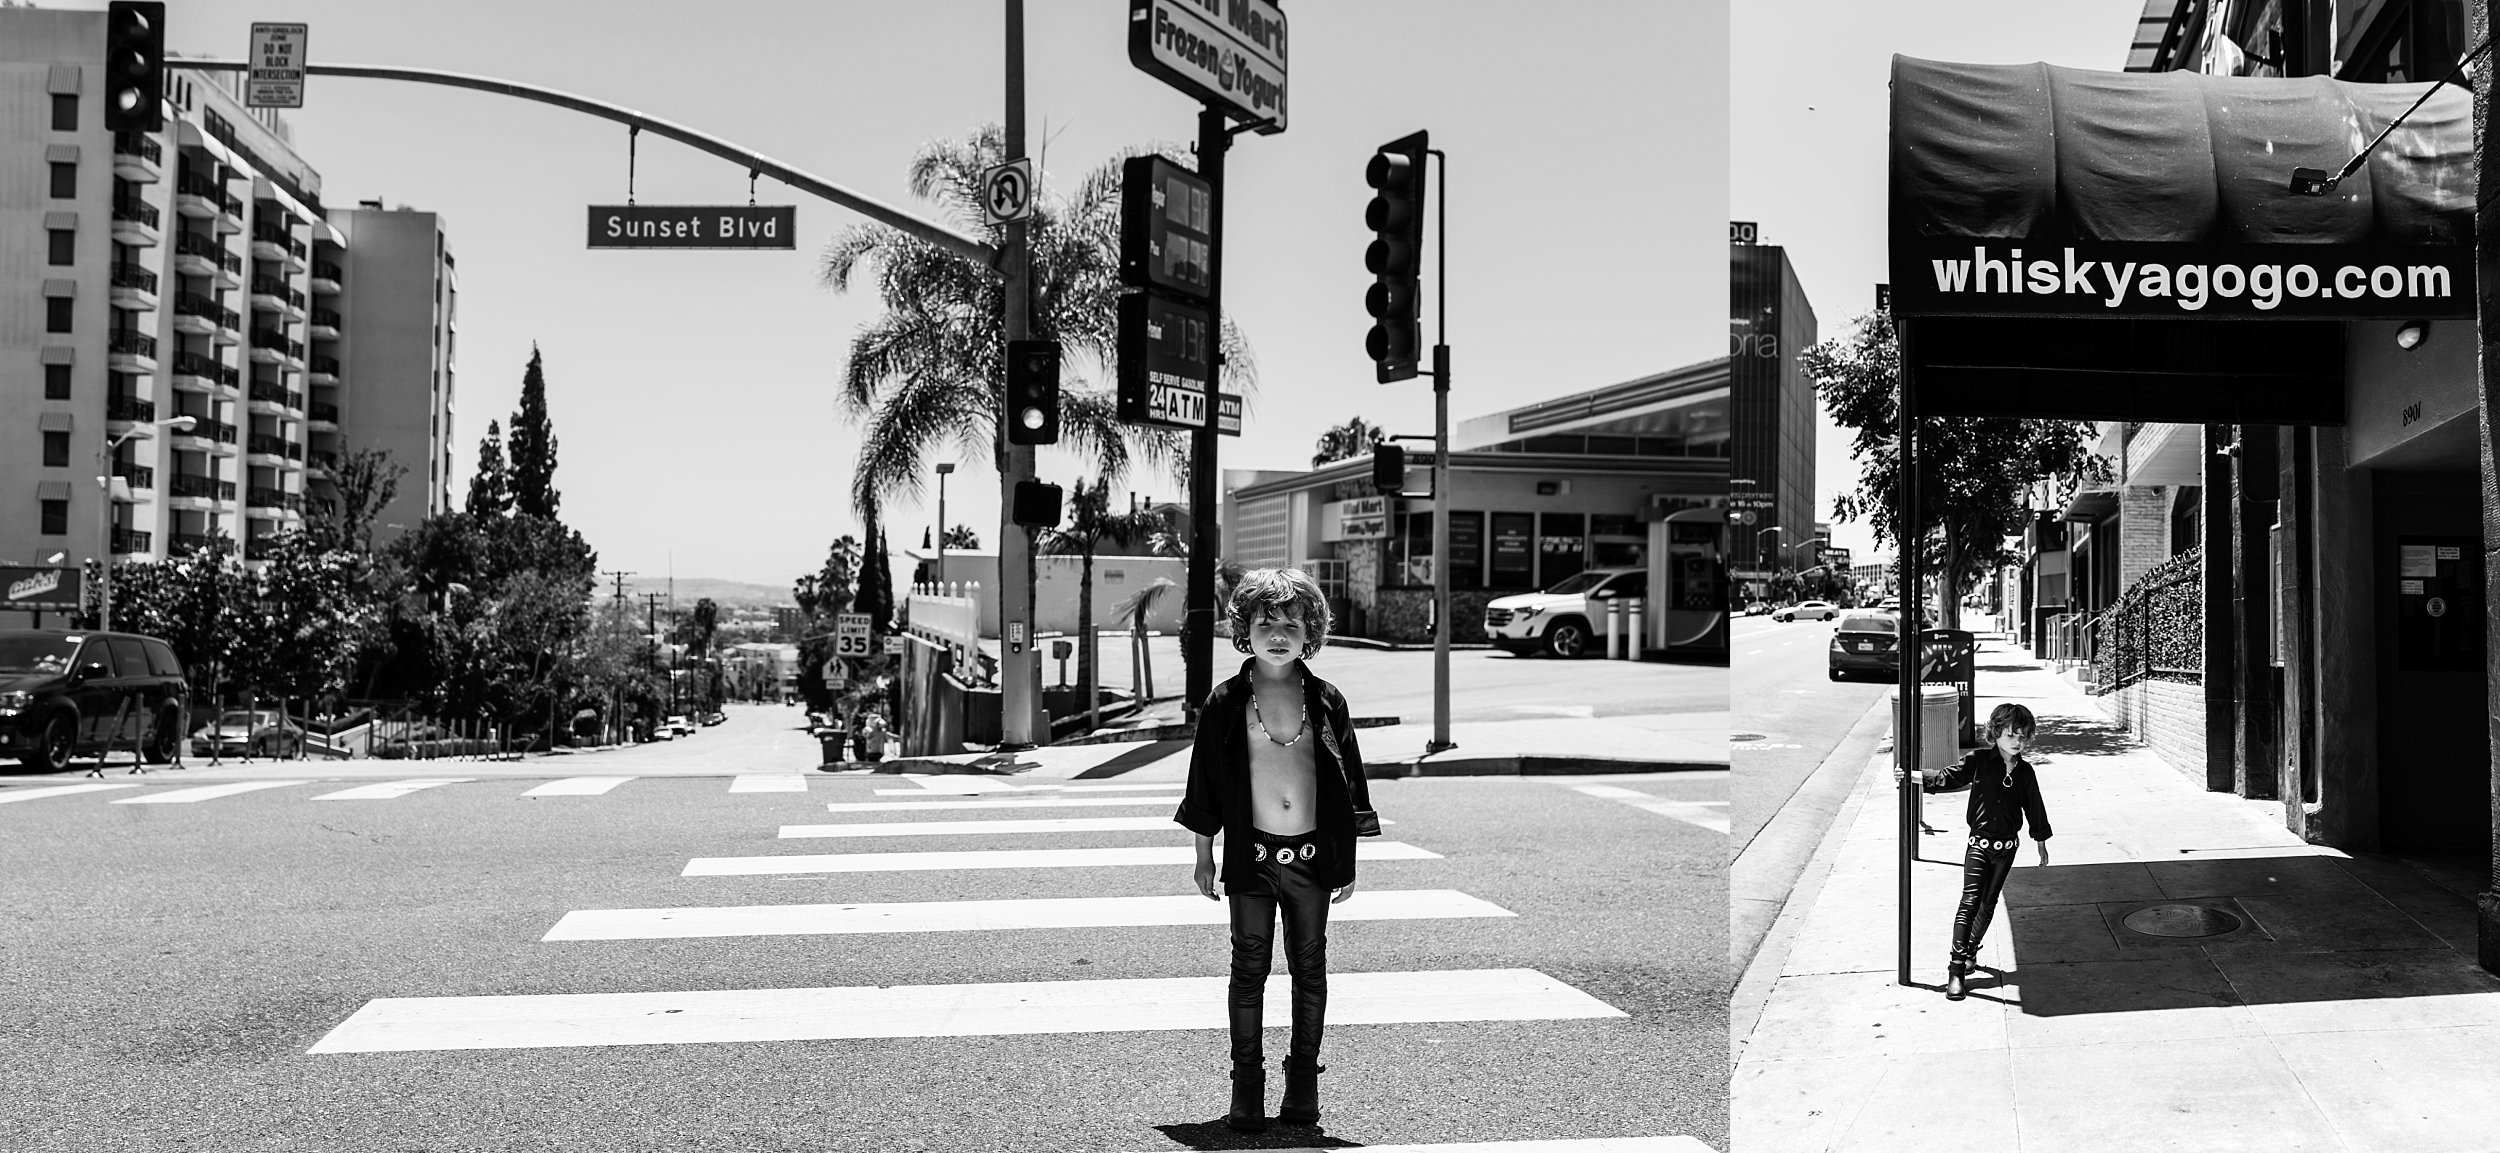 Child dressed as Jim Morrison from The Doors walking on Sunset Blvd